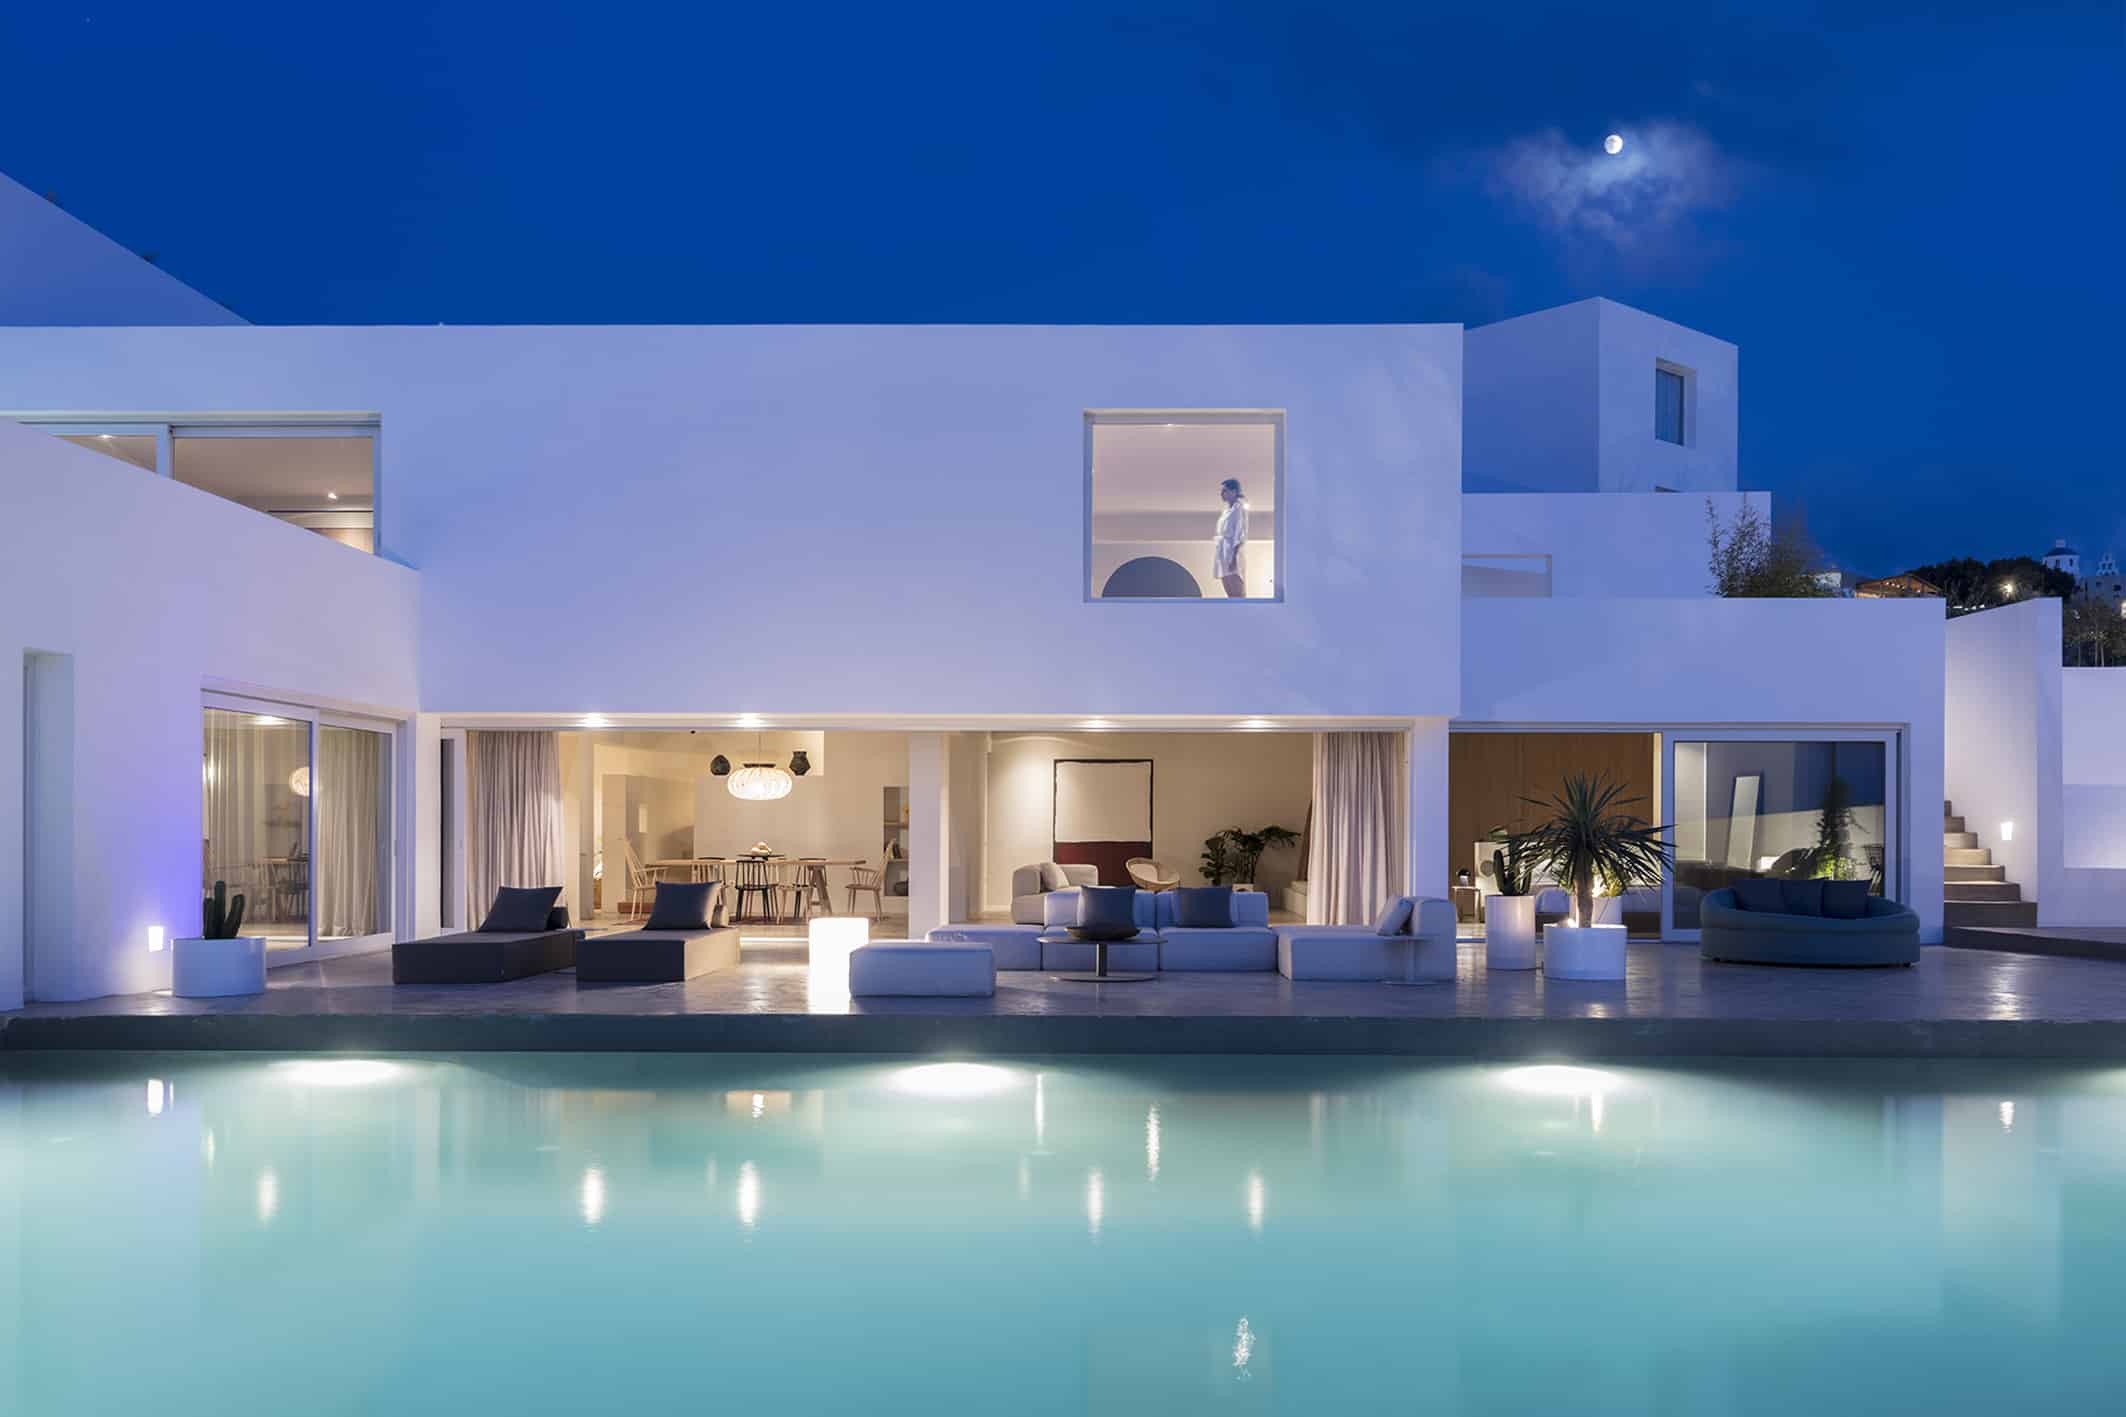 A modern villa with an open living area and pool illuminated in the evening, with a clear sky and the moon above.